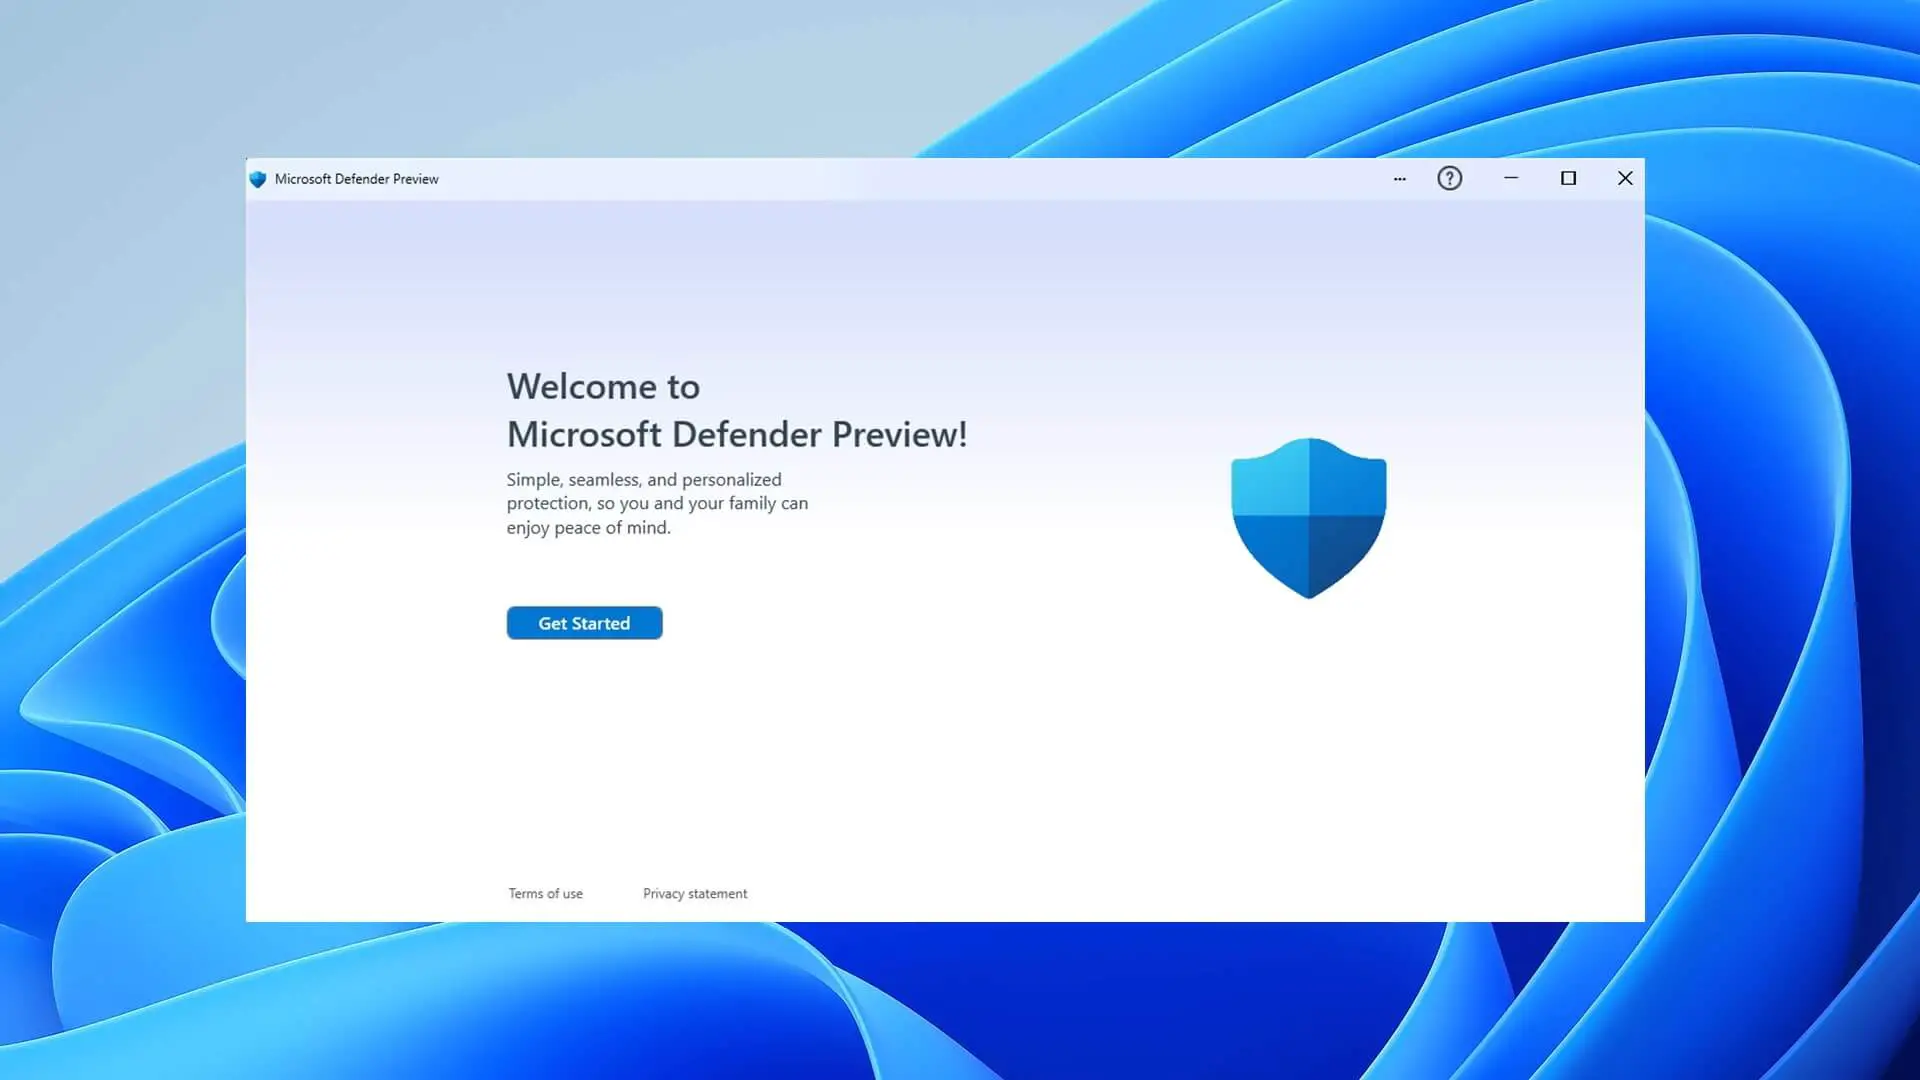 Windows 11's redesigned web-based Windows Defender is set to go live soon